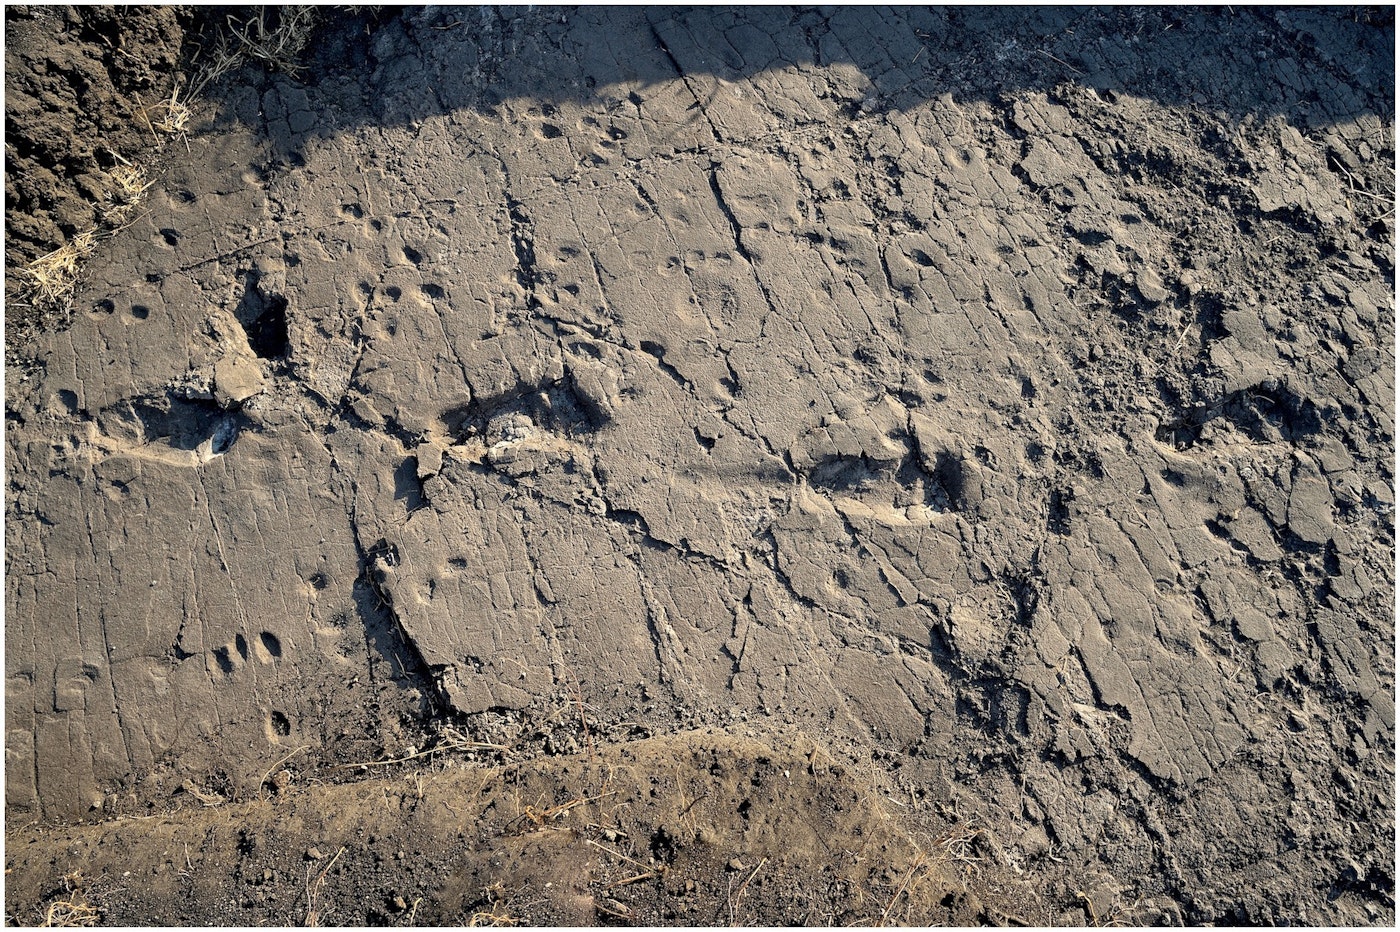 One set of the footprints found in Laetoli were attributed to an individual nicknamed 'Chewie'.